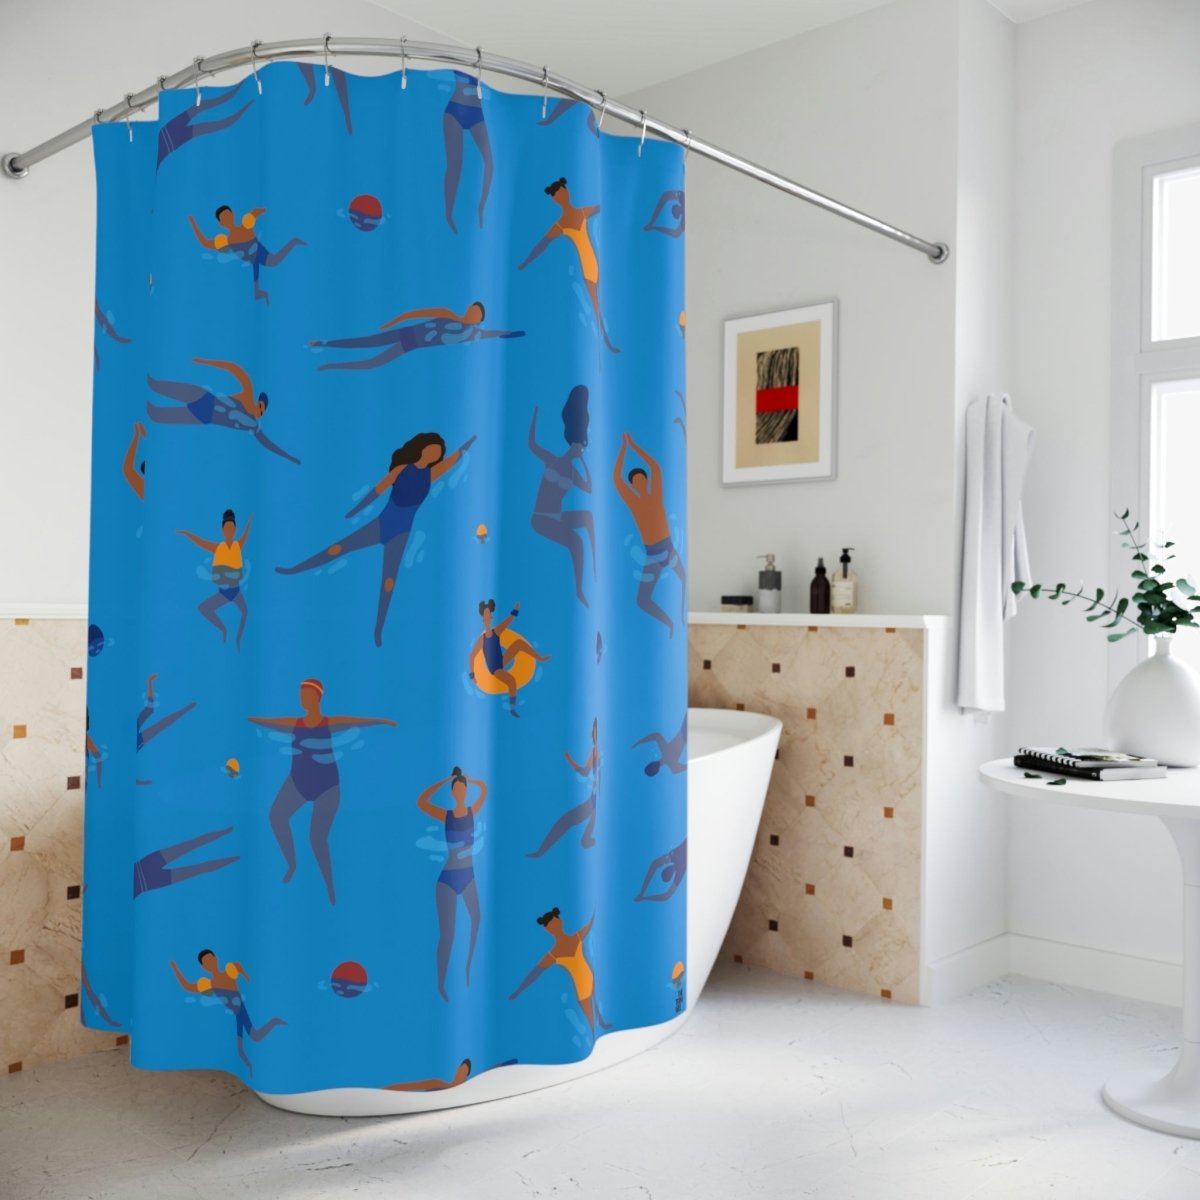 Swimmers Shower Curtain - The Trini Gee